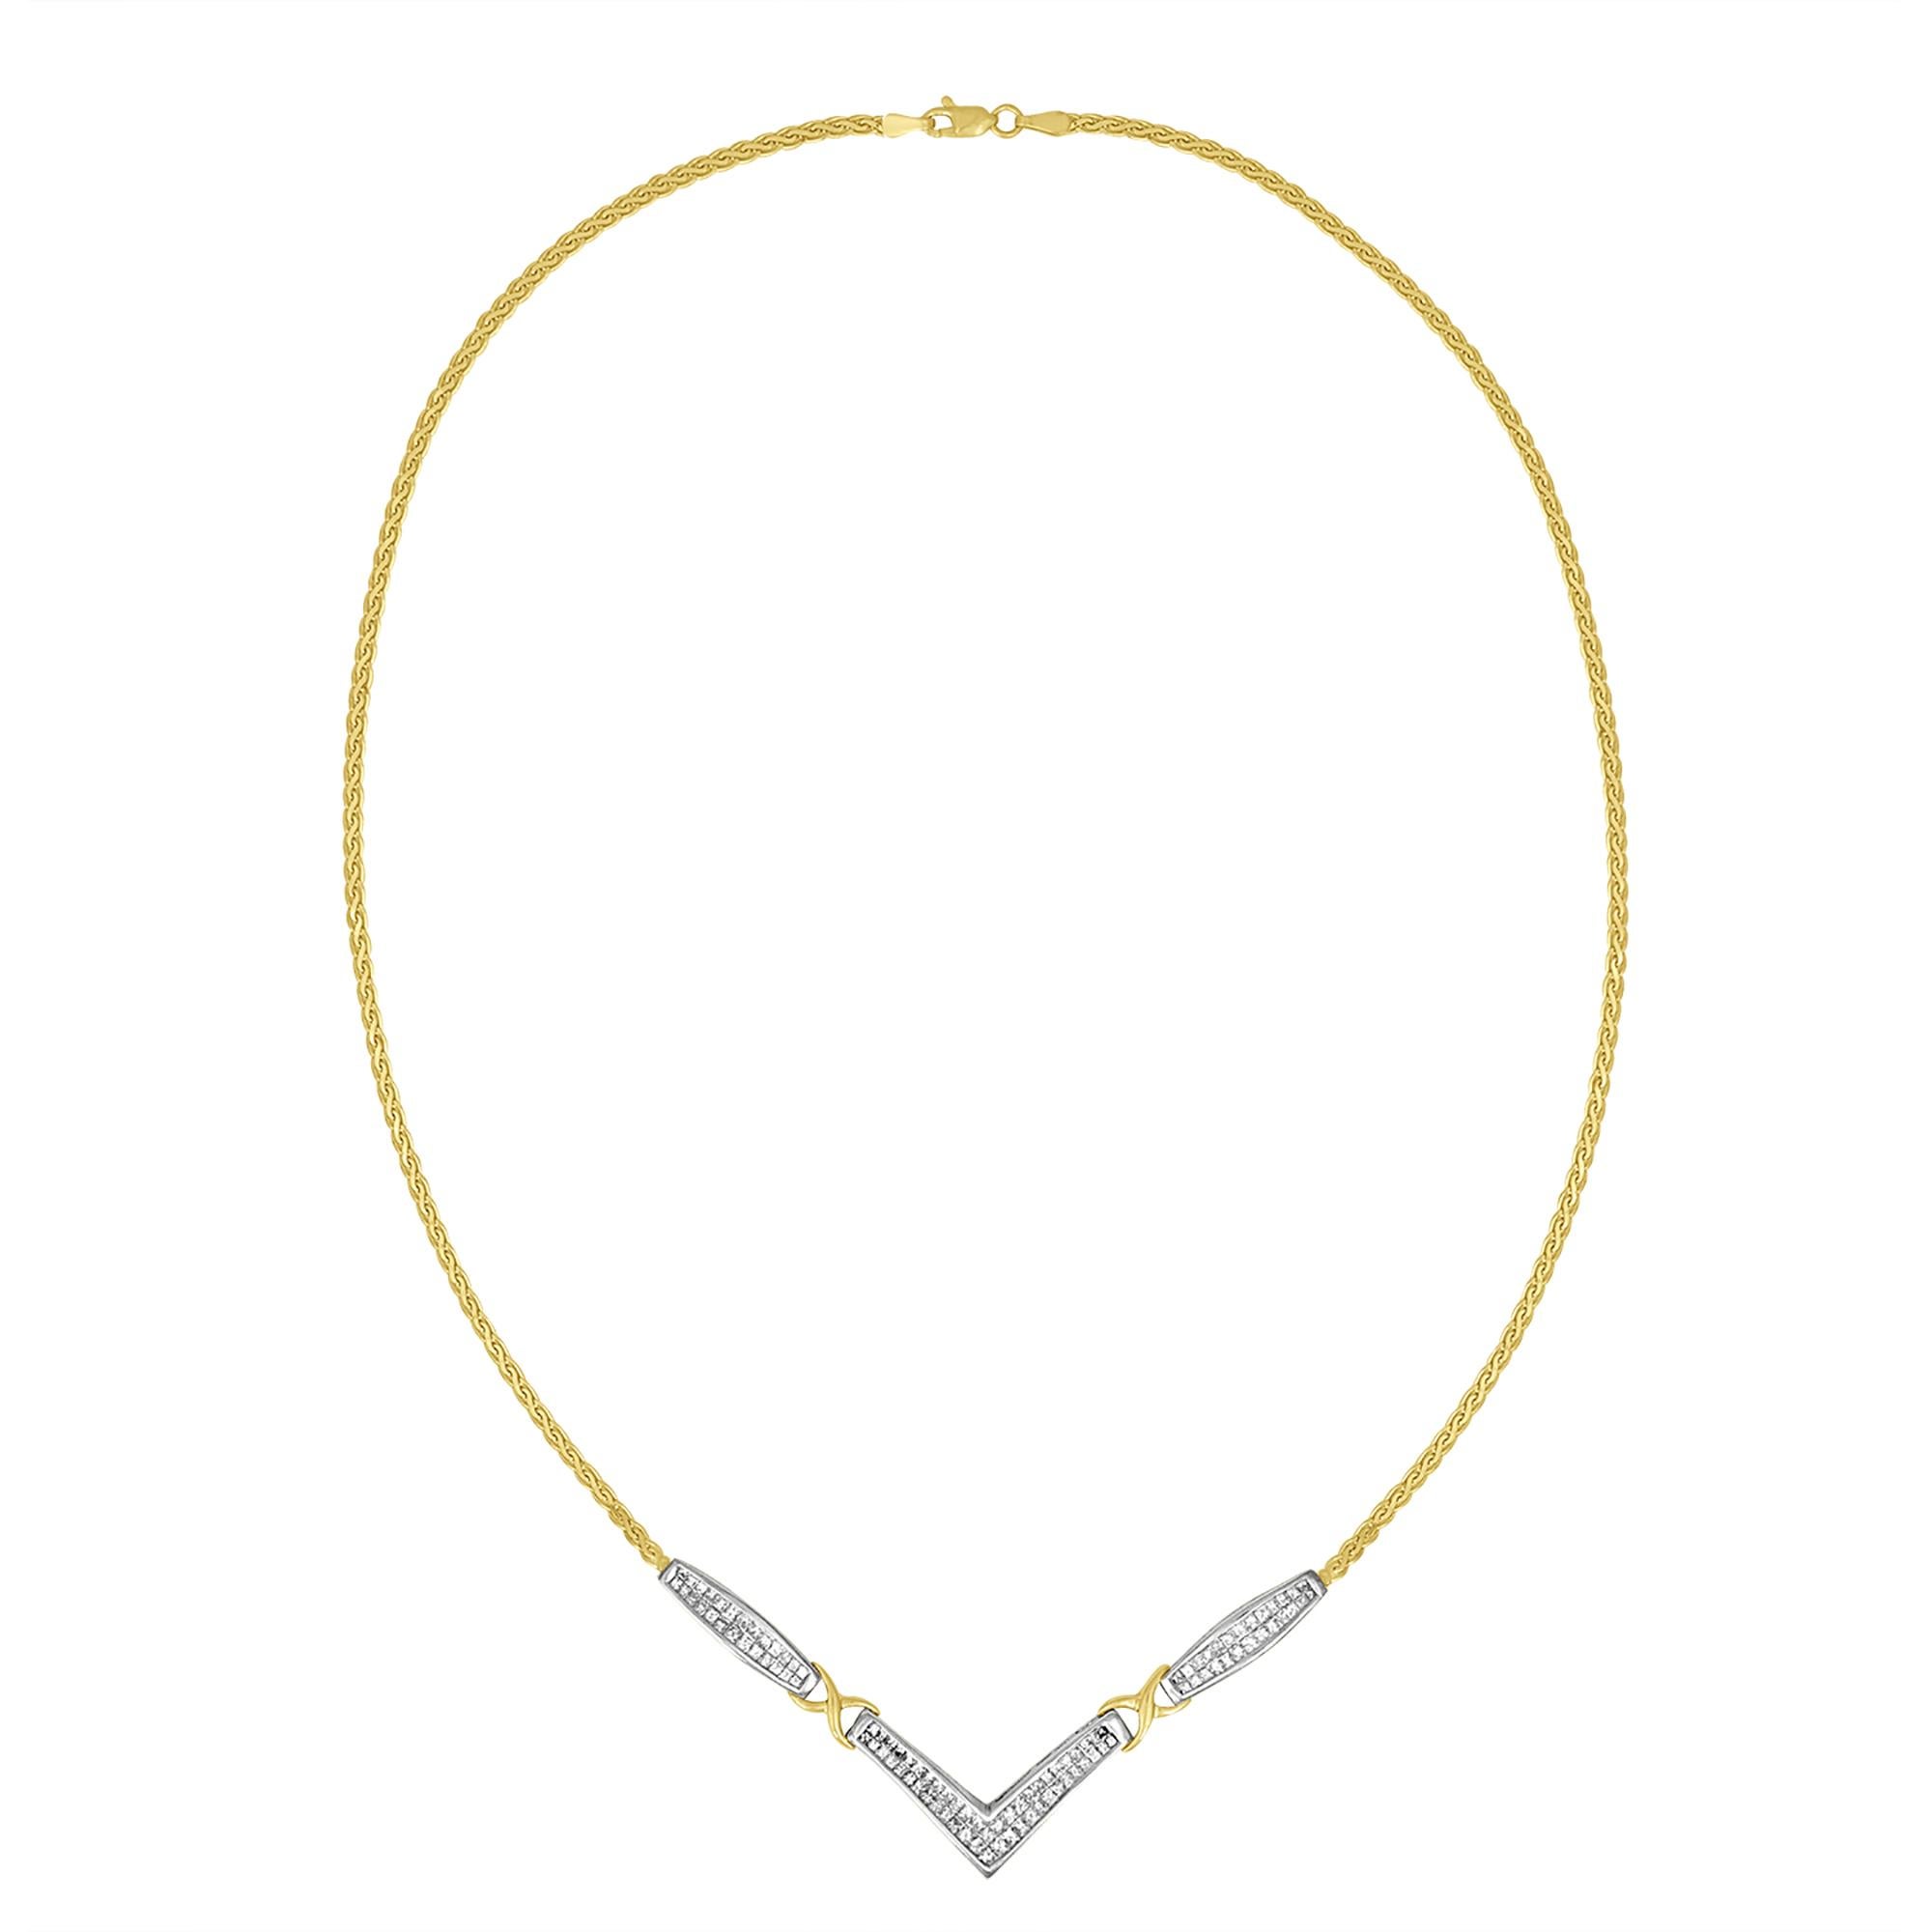 This necklace features 104 glittering diamonds channel set in a 14 karat gold pendant with yellow gold 